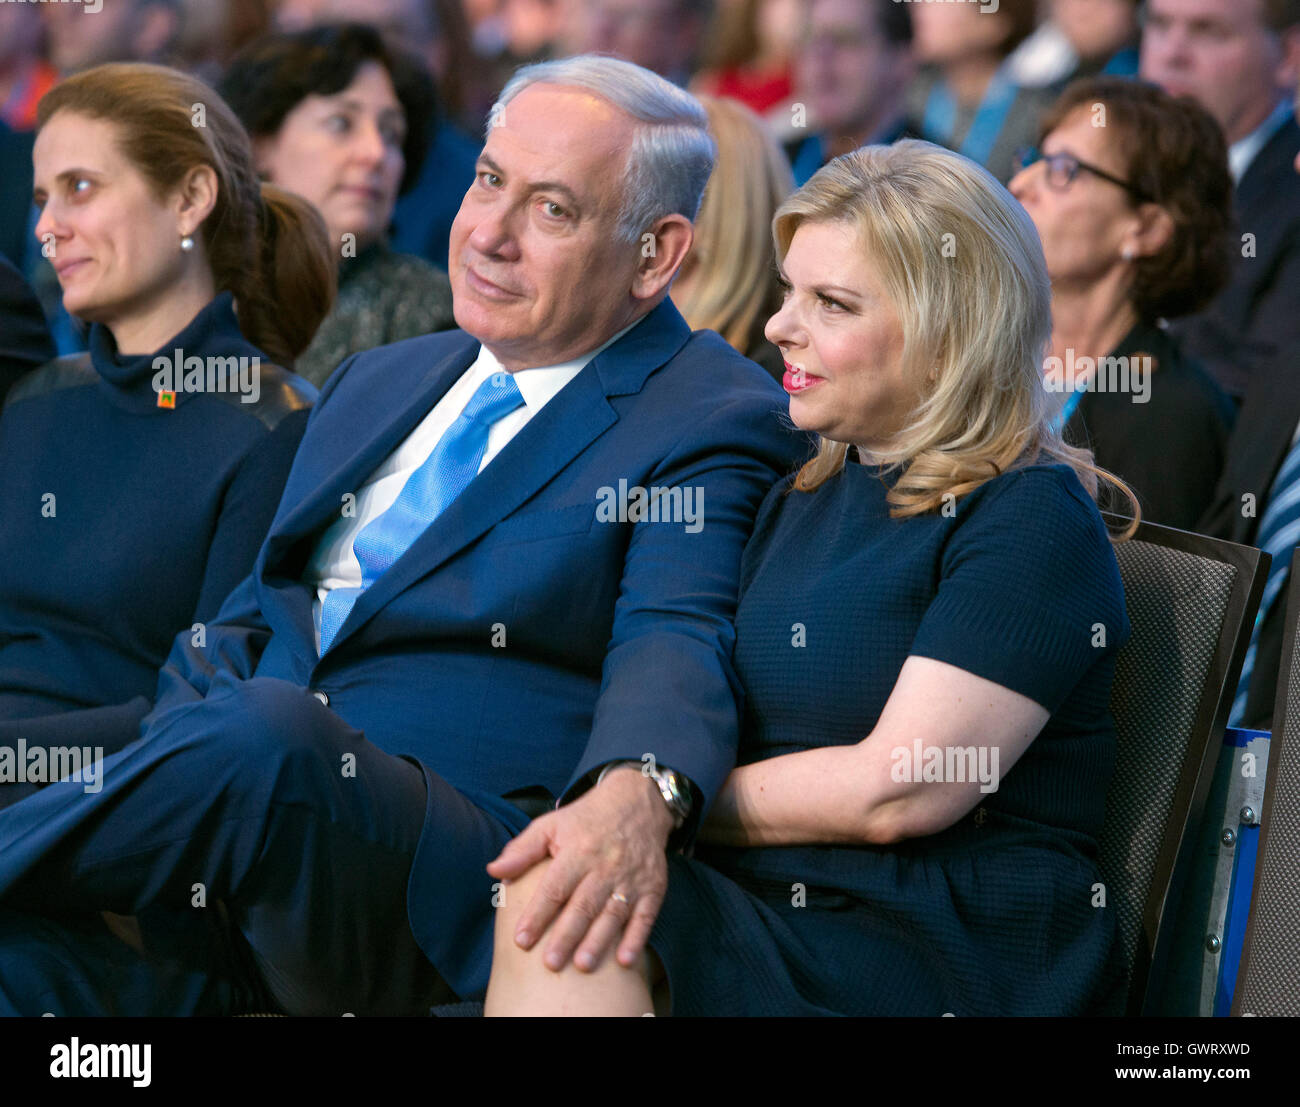 Prime Minister Benjamin Netanyahu of Israel and his wife, Sara, in the front row prior to his addressing the 2015 Jewish Federations of North America General Assembly at the Washington Hilton Hotel in Washington, DC on Tuesday, November 10, 2015. Credit: Stock Photo